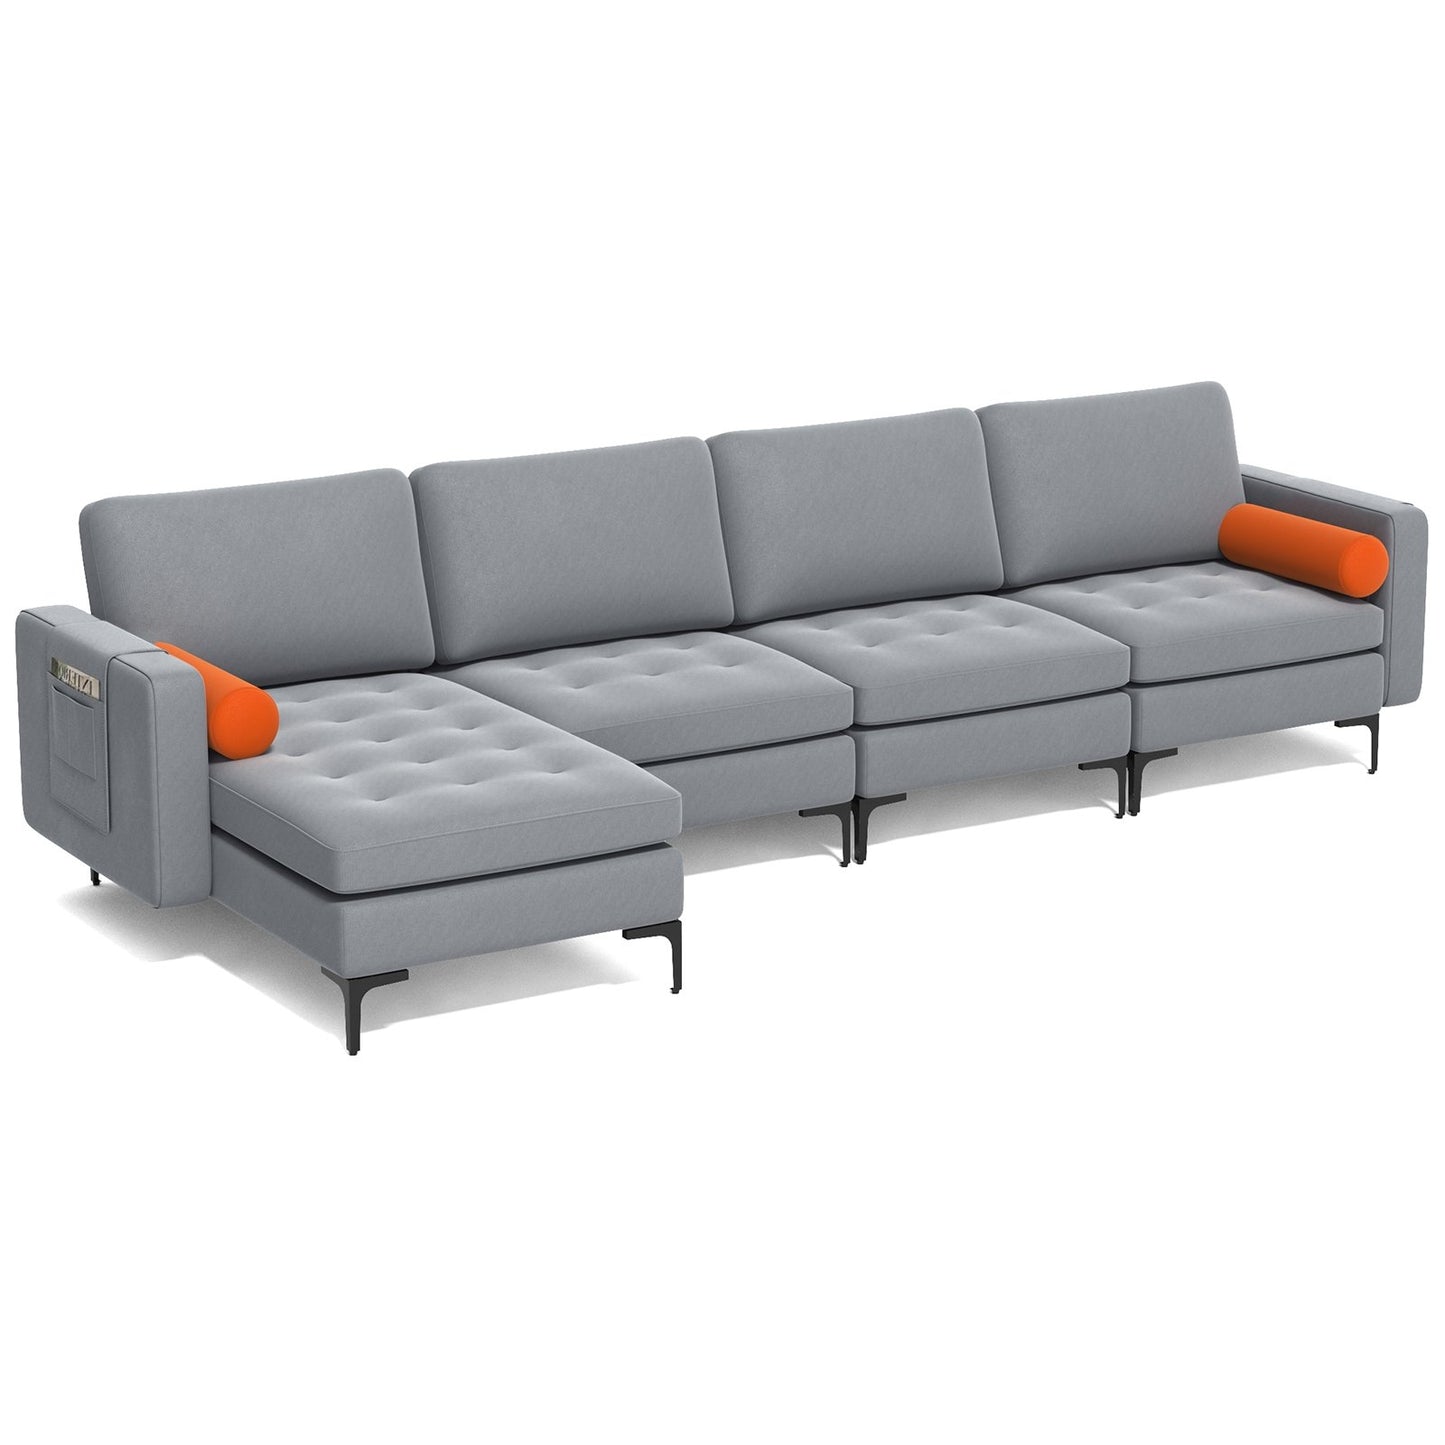 Modular L-shaped 4-Seat Sectional Sofa with Reversible Chaise and 2 USB Ports, Gray